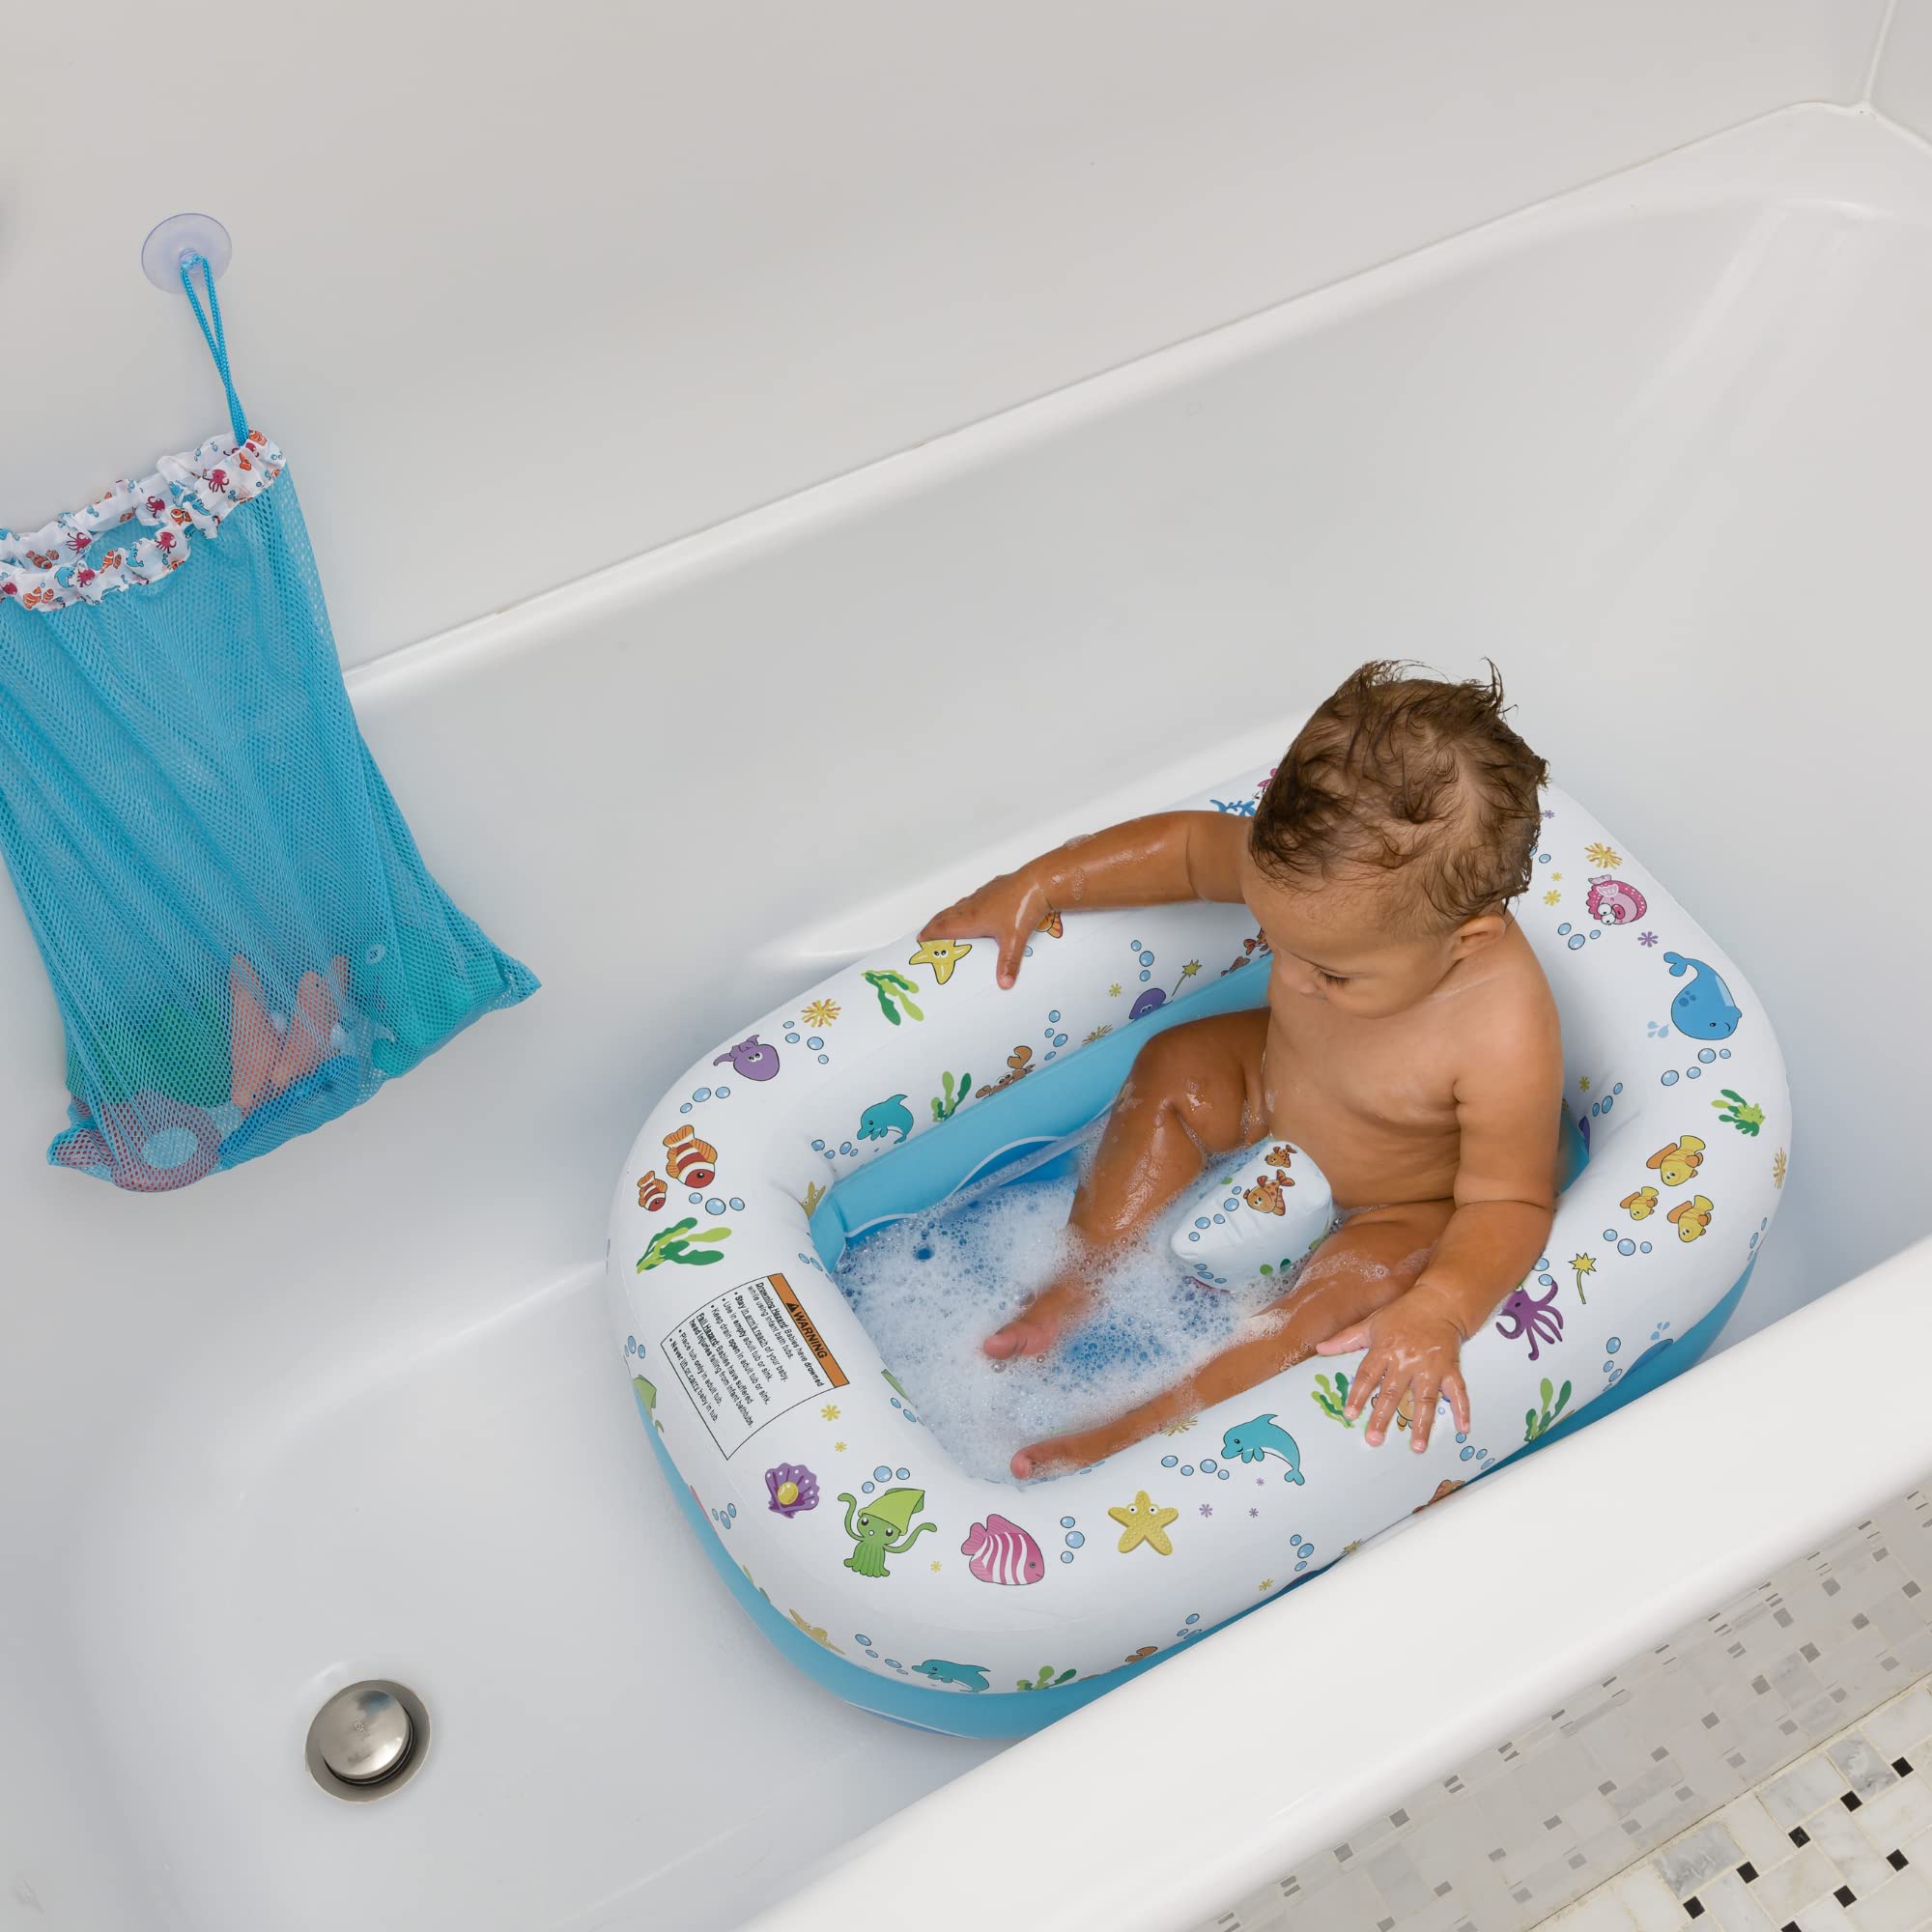 Mommy's Helper Inflatable Bathtub for Baby & Toddler; Saddle Horn Baby Bath Seat Keeps Baby from Sliding; Whimsical Ocean Design Makes Toddler Bath time Fun; Recommended Age 6 to 24 Months